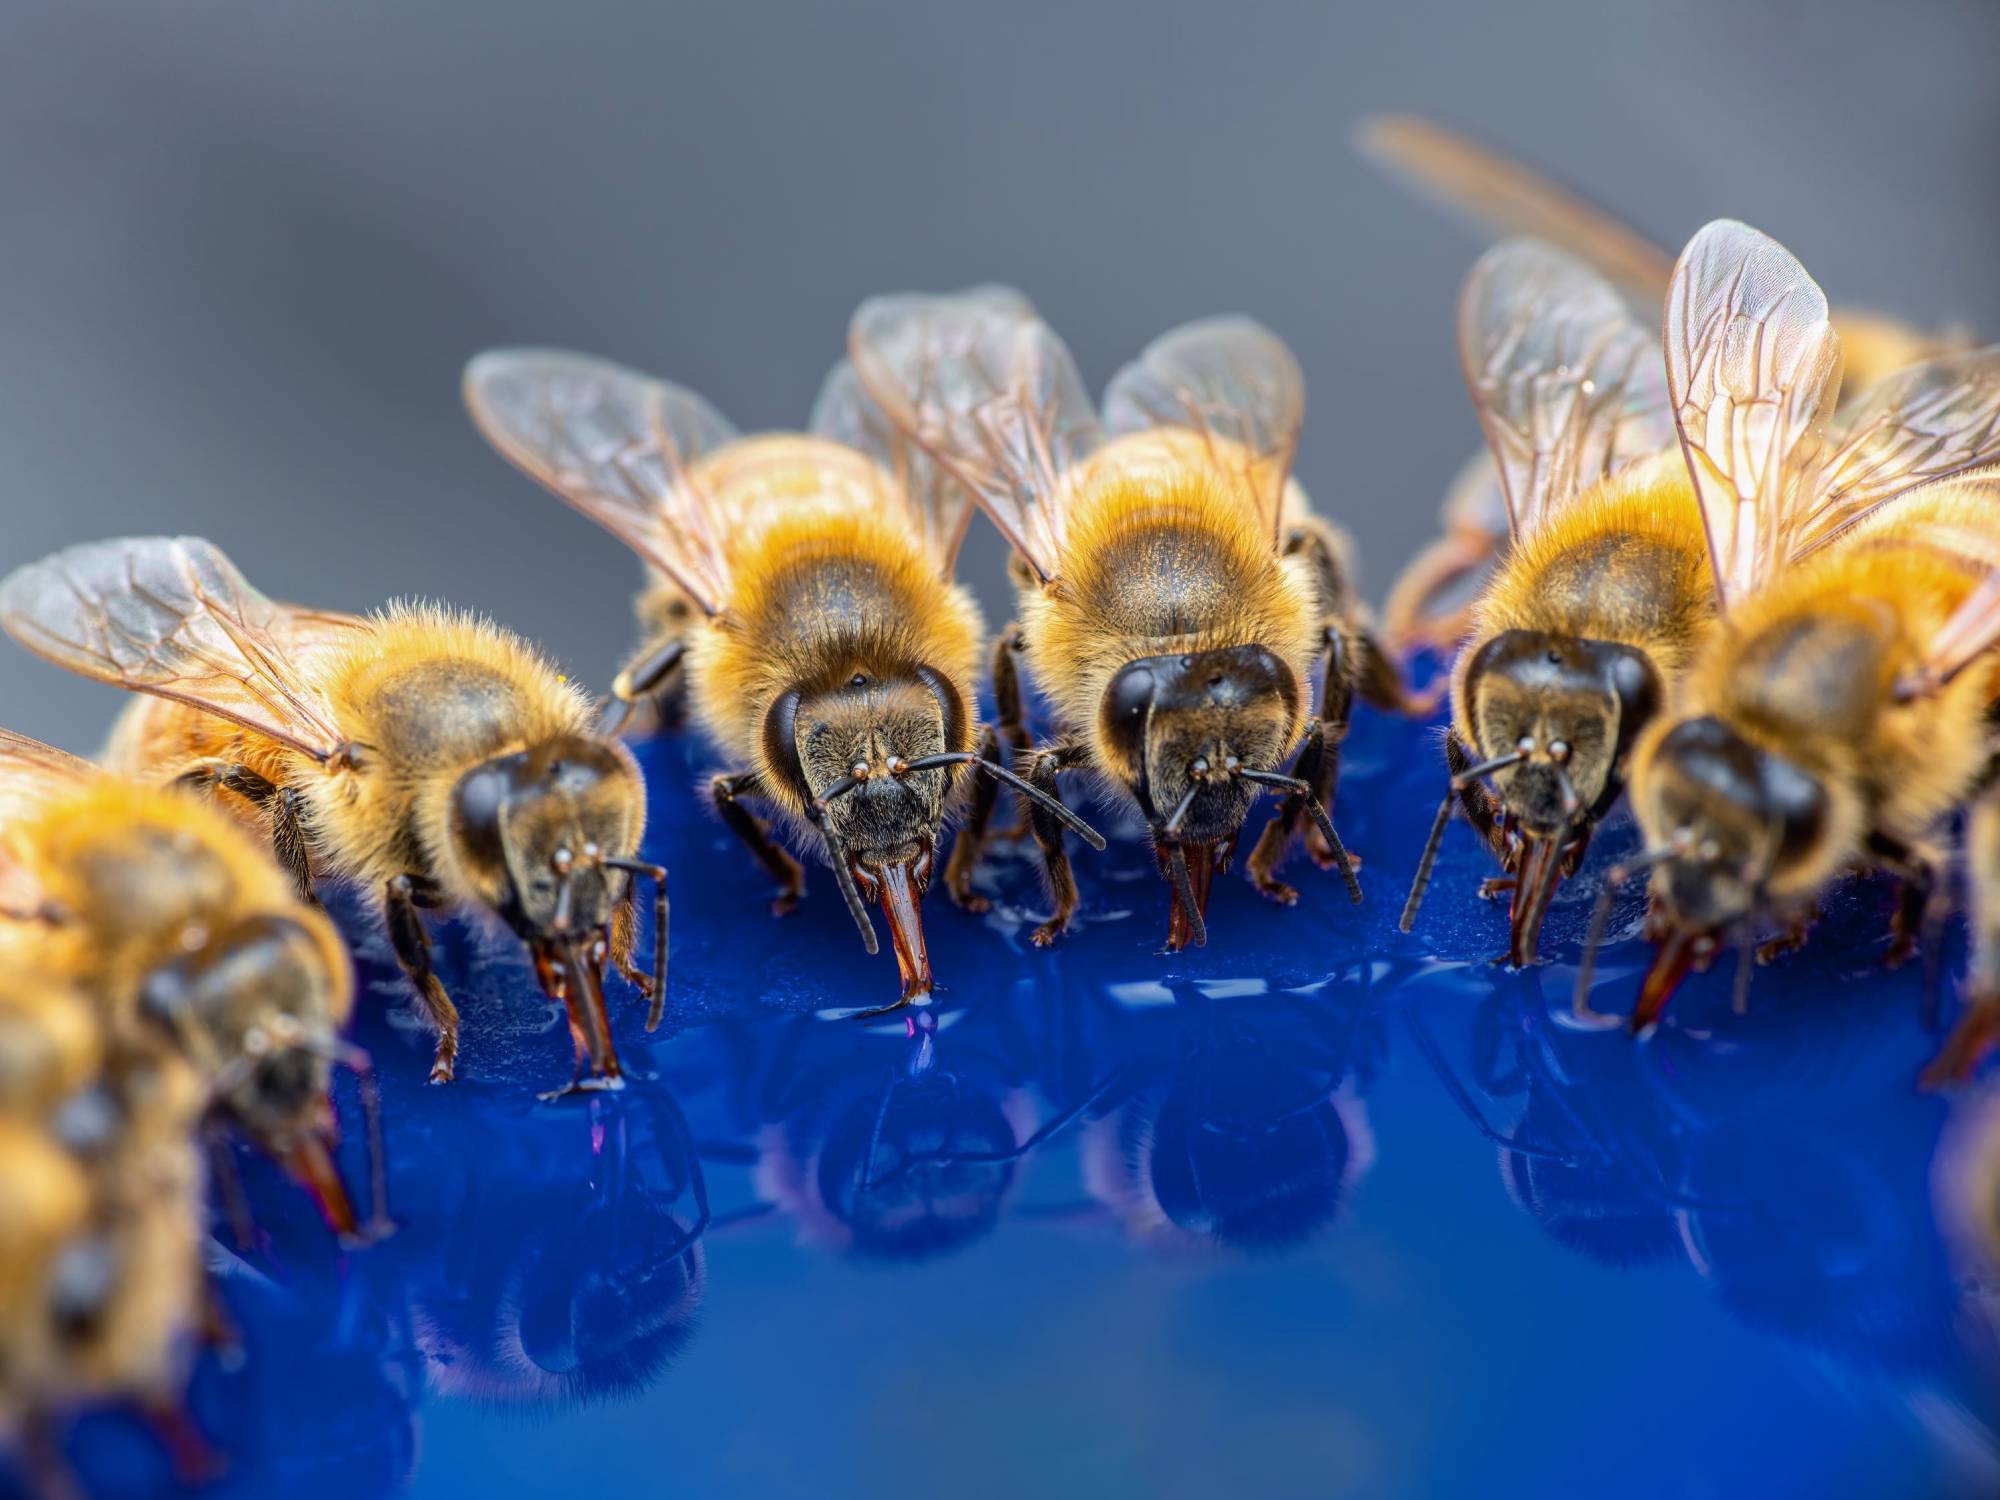 How to save the bees without becoming a beekeeper | Popular Science